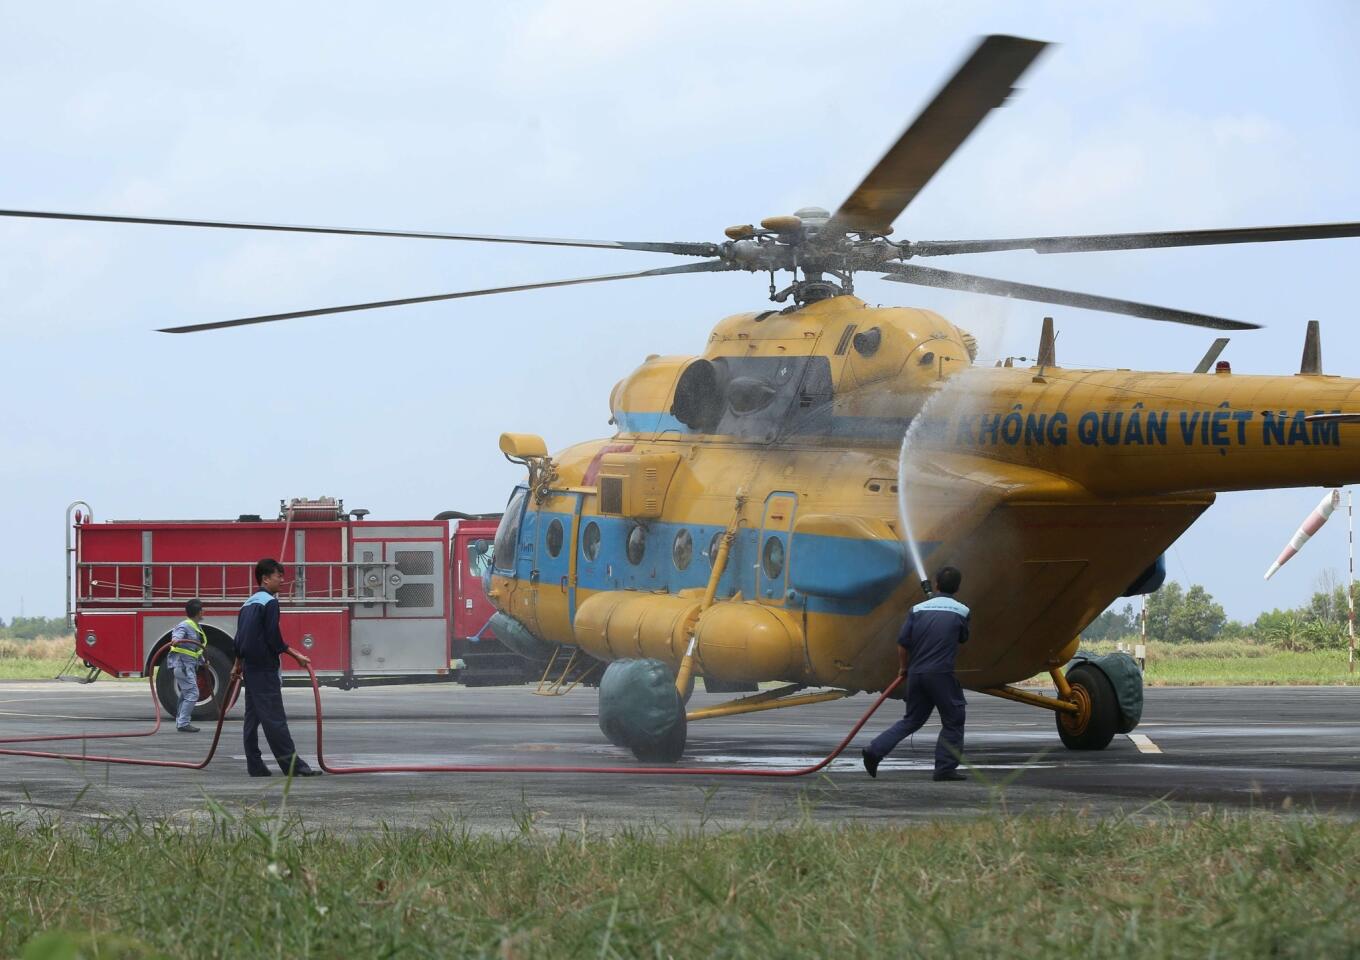 Workers spray a Vietnam Air Force Russian-made MI-17 helicopter at an airport in Ca Mau city after a search operation for the missing Malaysia Airlines flight MH370 plane over the U Minh jungle in southern province of Ca Mau.